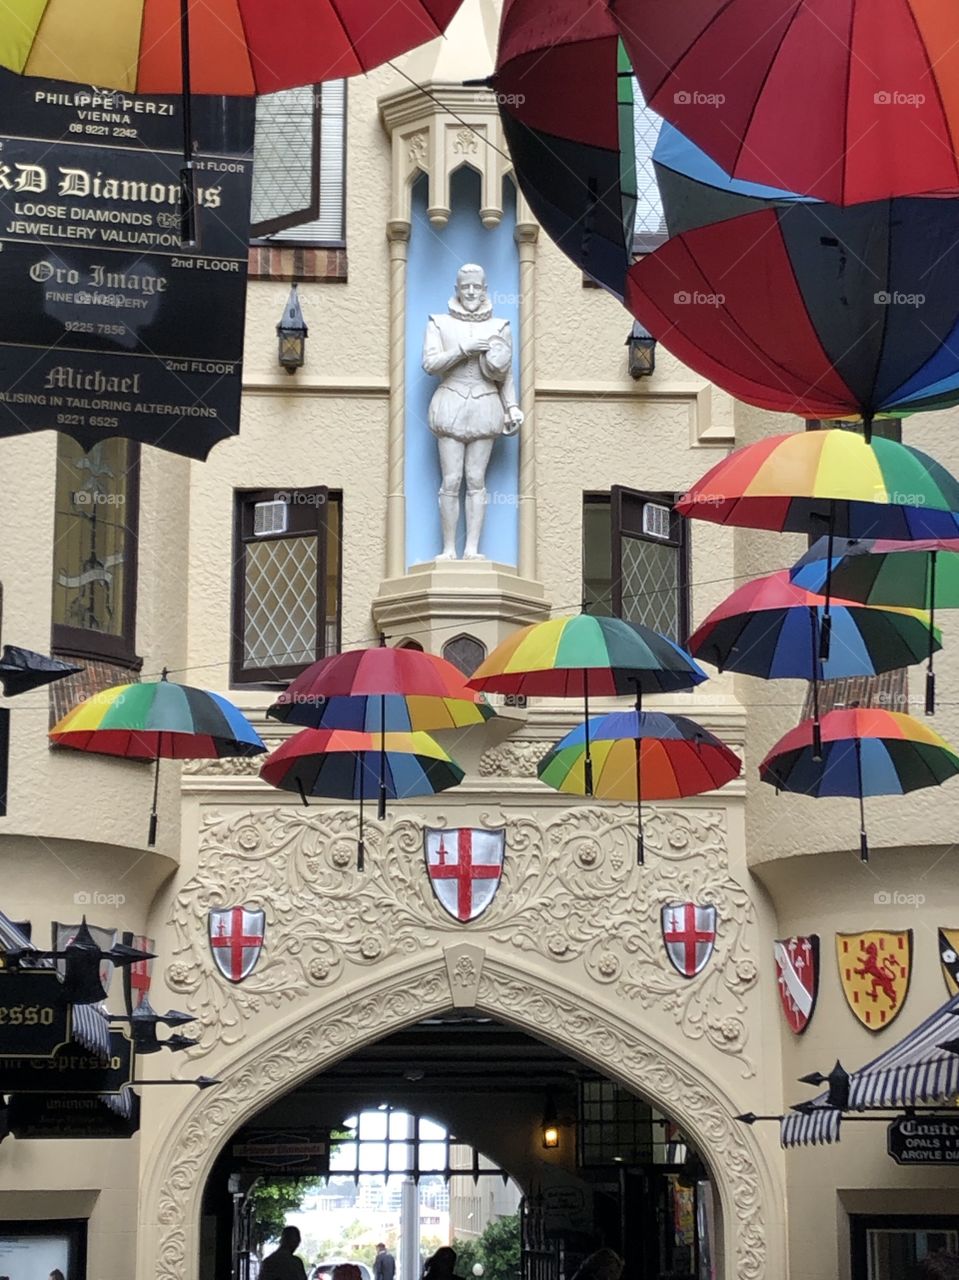 Statue of Sir Walter Raleigh, London Court, Perth Australia - London Court is a retail arcade built in 1937 is running between Hay Street Mall & St Georges Terrace. The colourful umbrellas make happiness to locals and tourists in winter. 